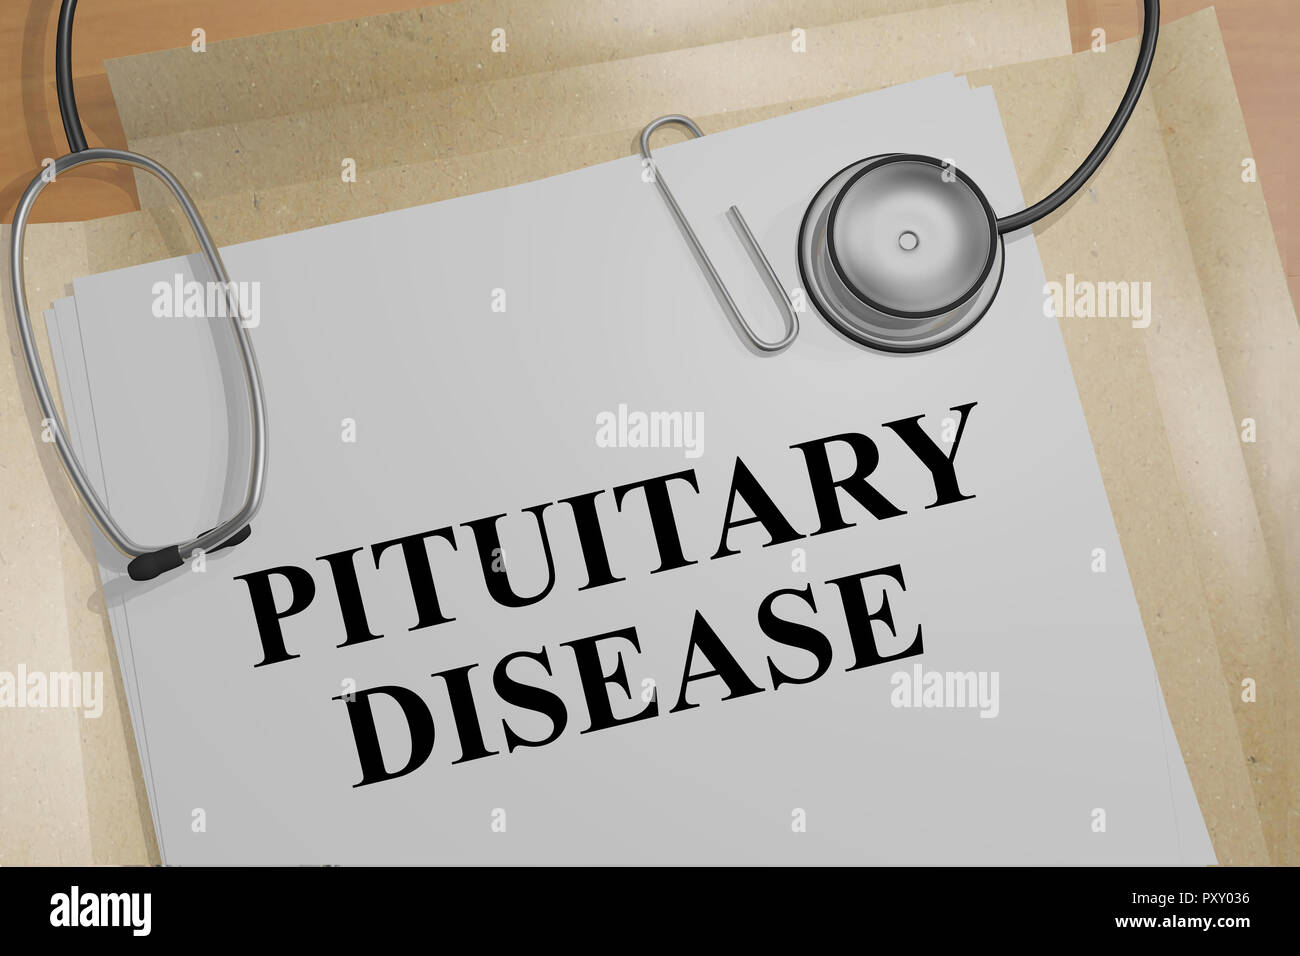 3D illustration of PITUITARY DISEASE title on a medical document Stock Photo